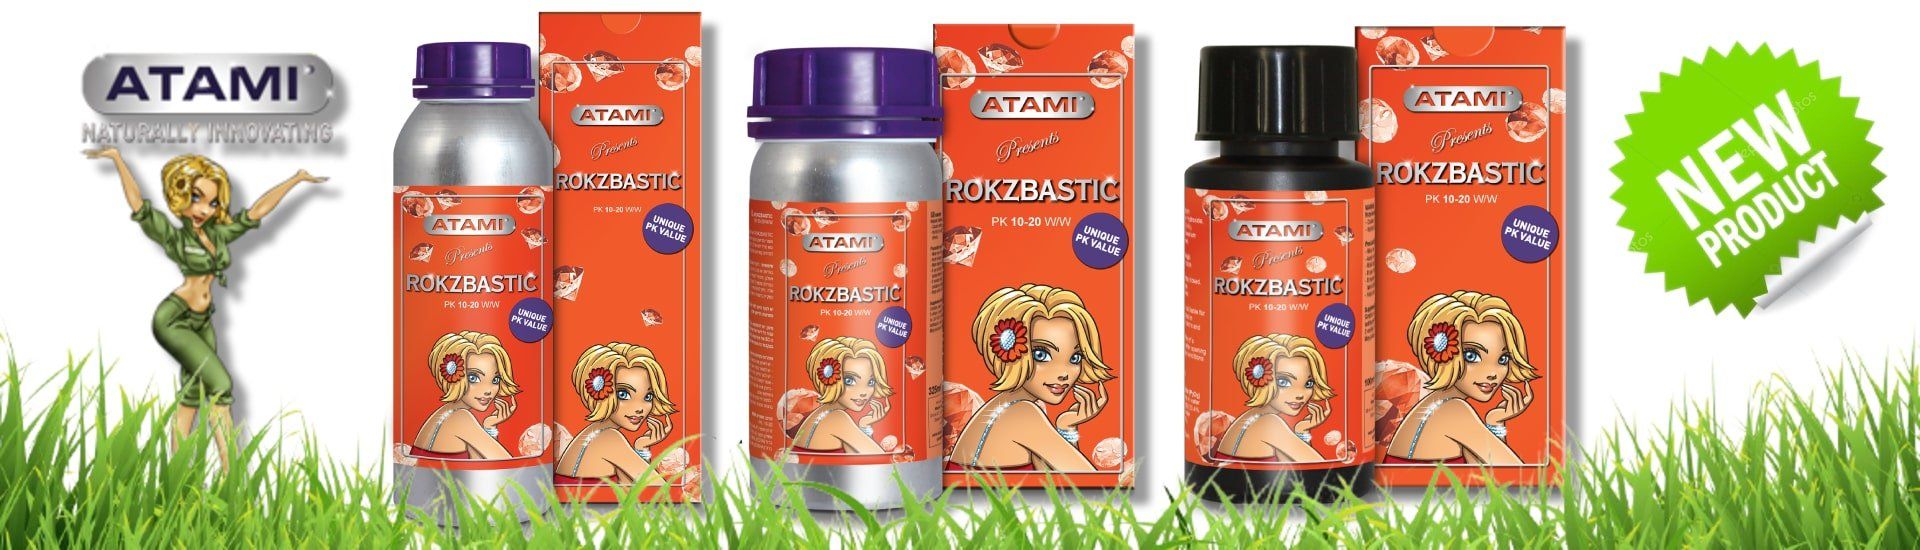 Meet the newest member of the Bastics… Rokzbastic!  Rokzbastic is a flowering product that can be used from the last weeks of flowering throughout the fruiting and ripening phase. Its unique PK 10-20 ratio ensures that your plants receive everything they need to produce firm flowers and fruit.